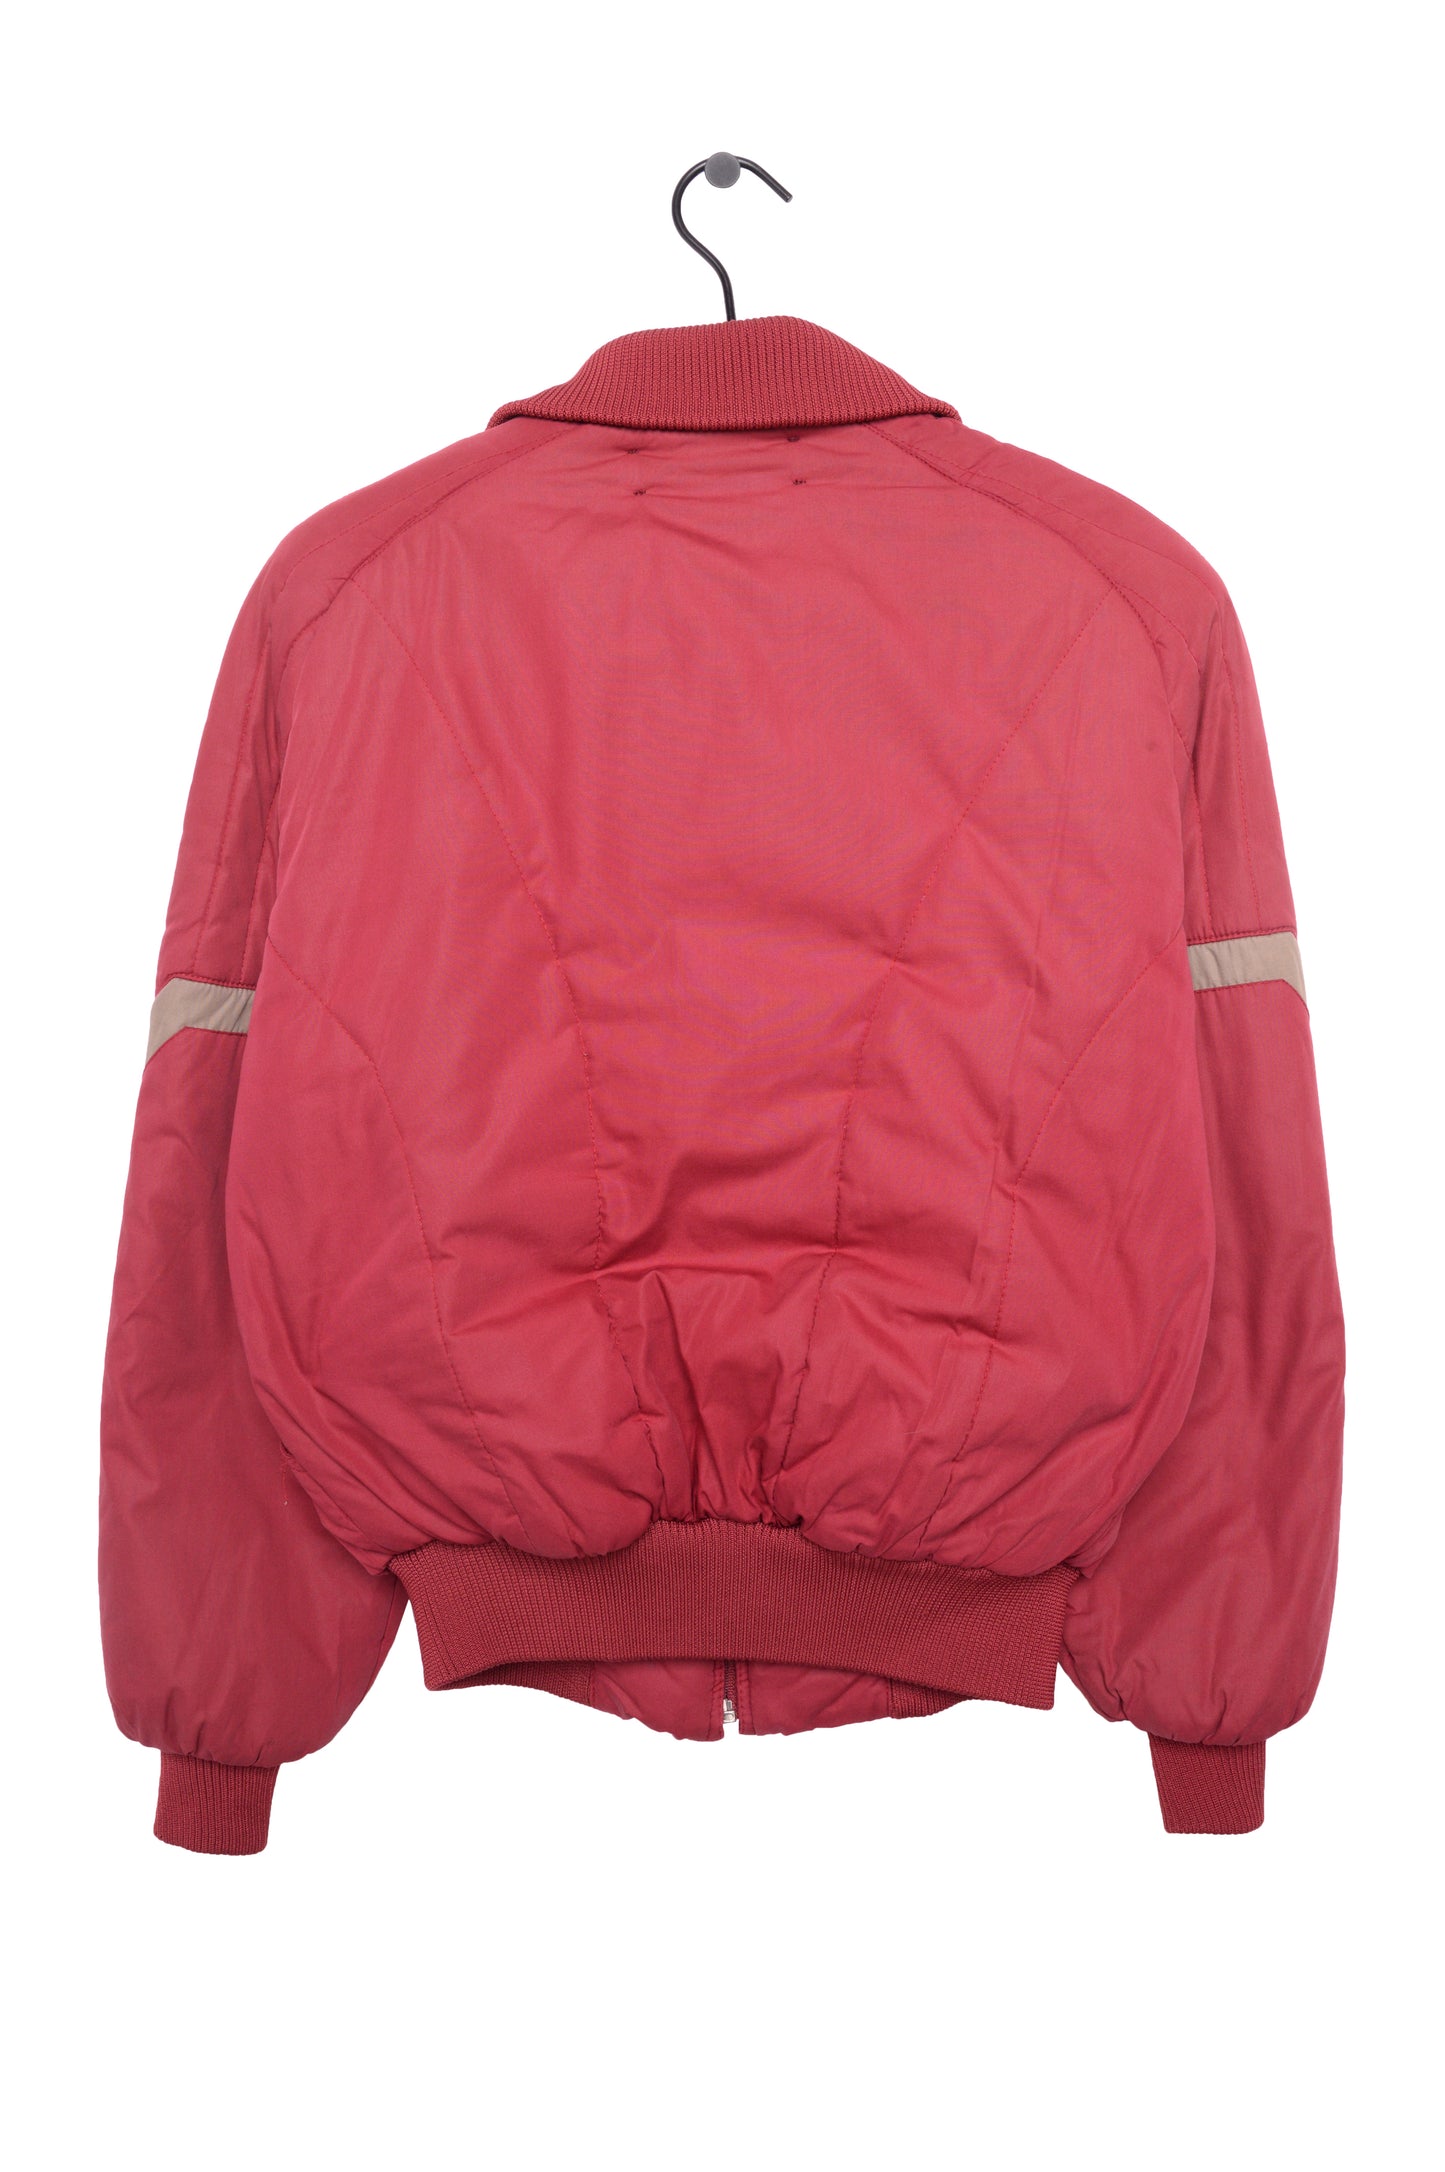 Member's Only Puffer Jacket